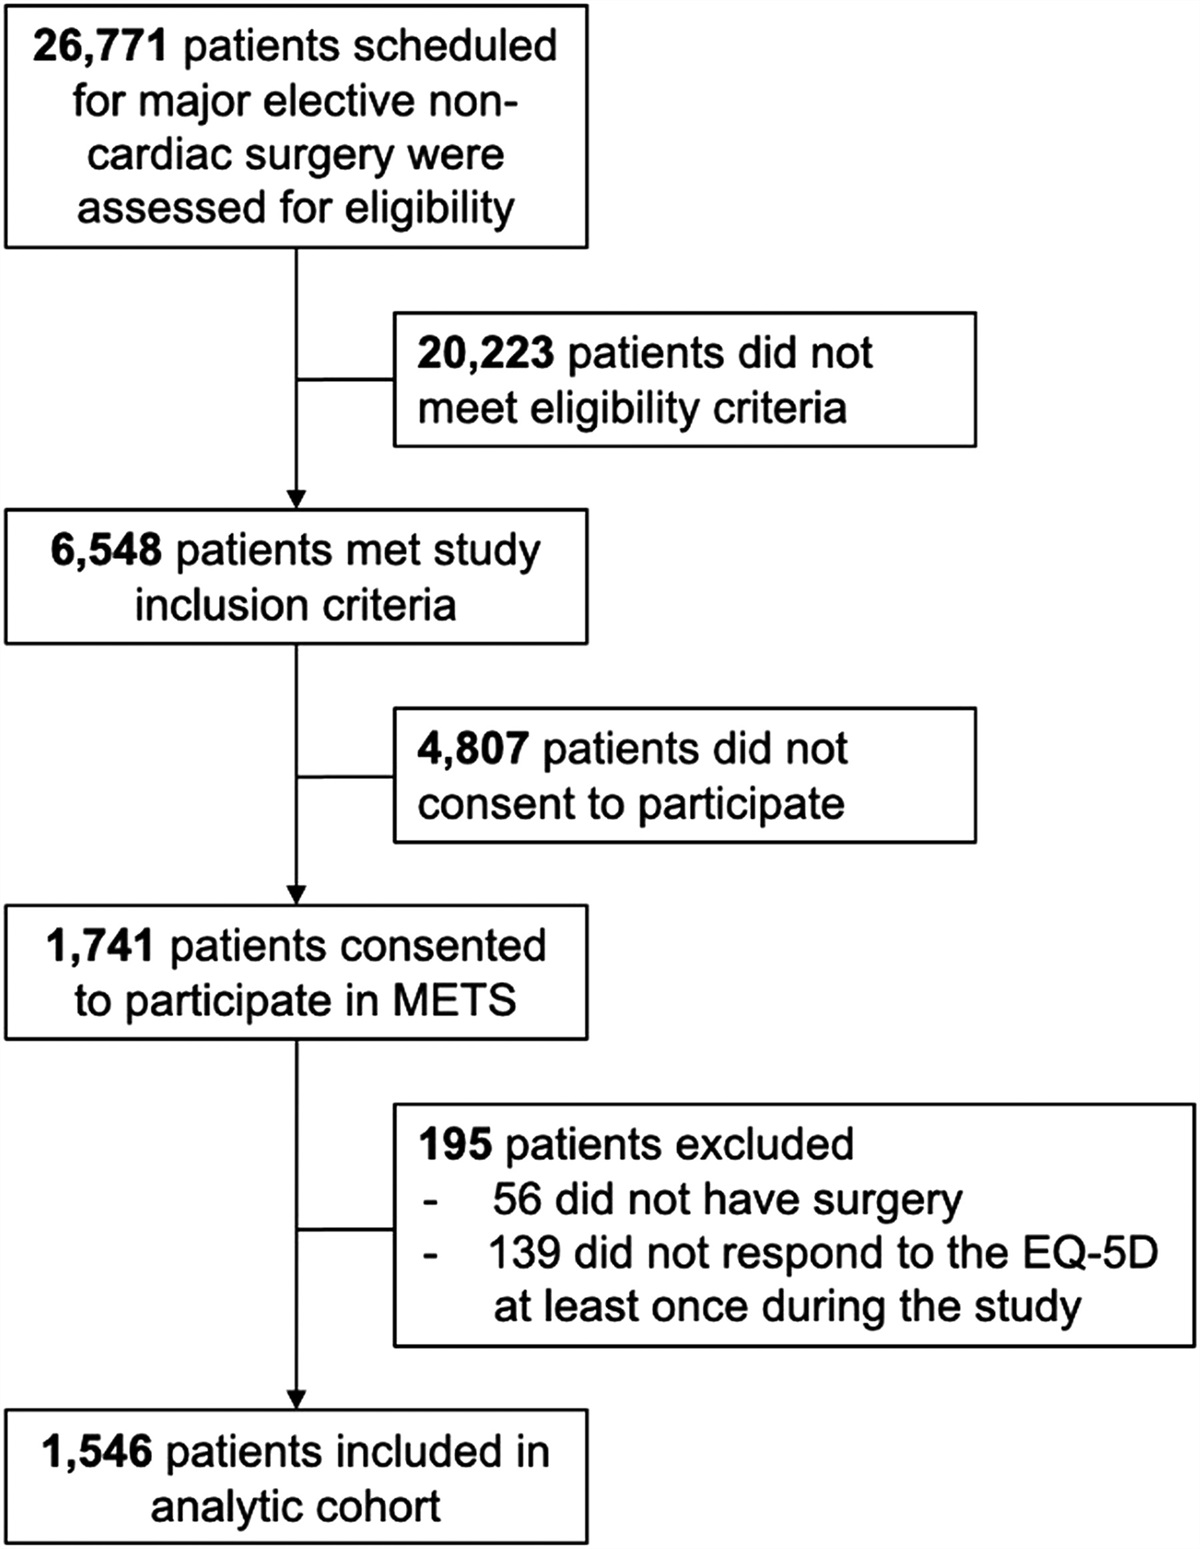 Psychological Distress After Inpatient Noncardiac Surgery: A Secondary Analysis of the Measurement of Exercise Tolerance Before Surgery Prospective Cohort Study